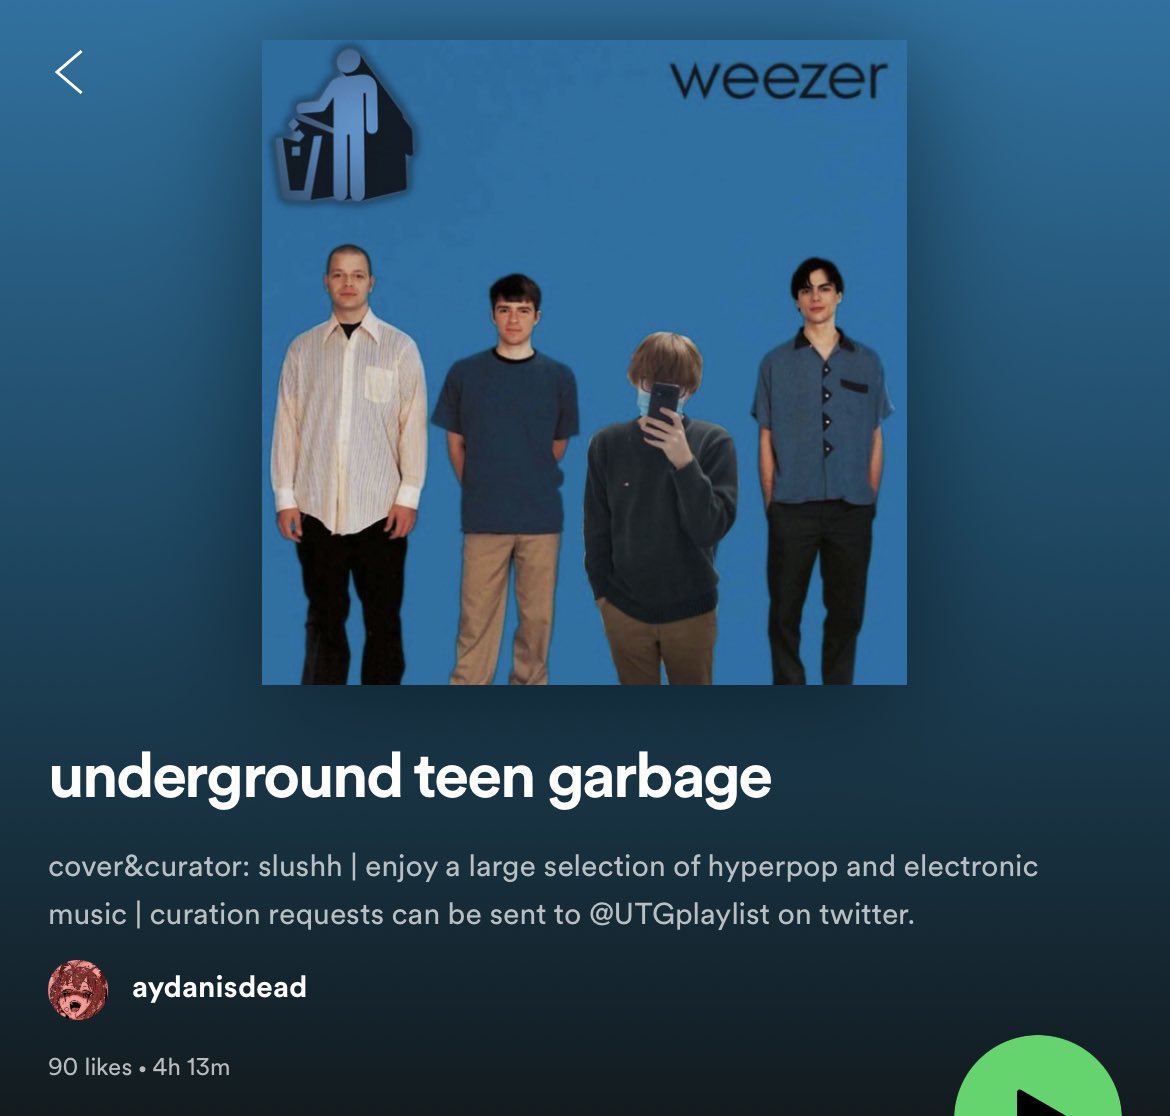 welcome to underground teen garbage cover&curated by the hypertrap prodigy @rayberrycrunch 😈🖤 enjoy a large selection of slushh’s favorite songs right here at UTG <3 link in next tweet ‼️